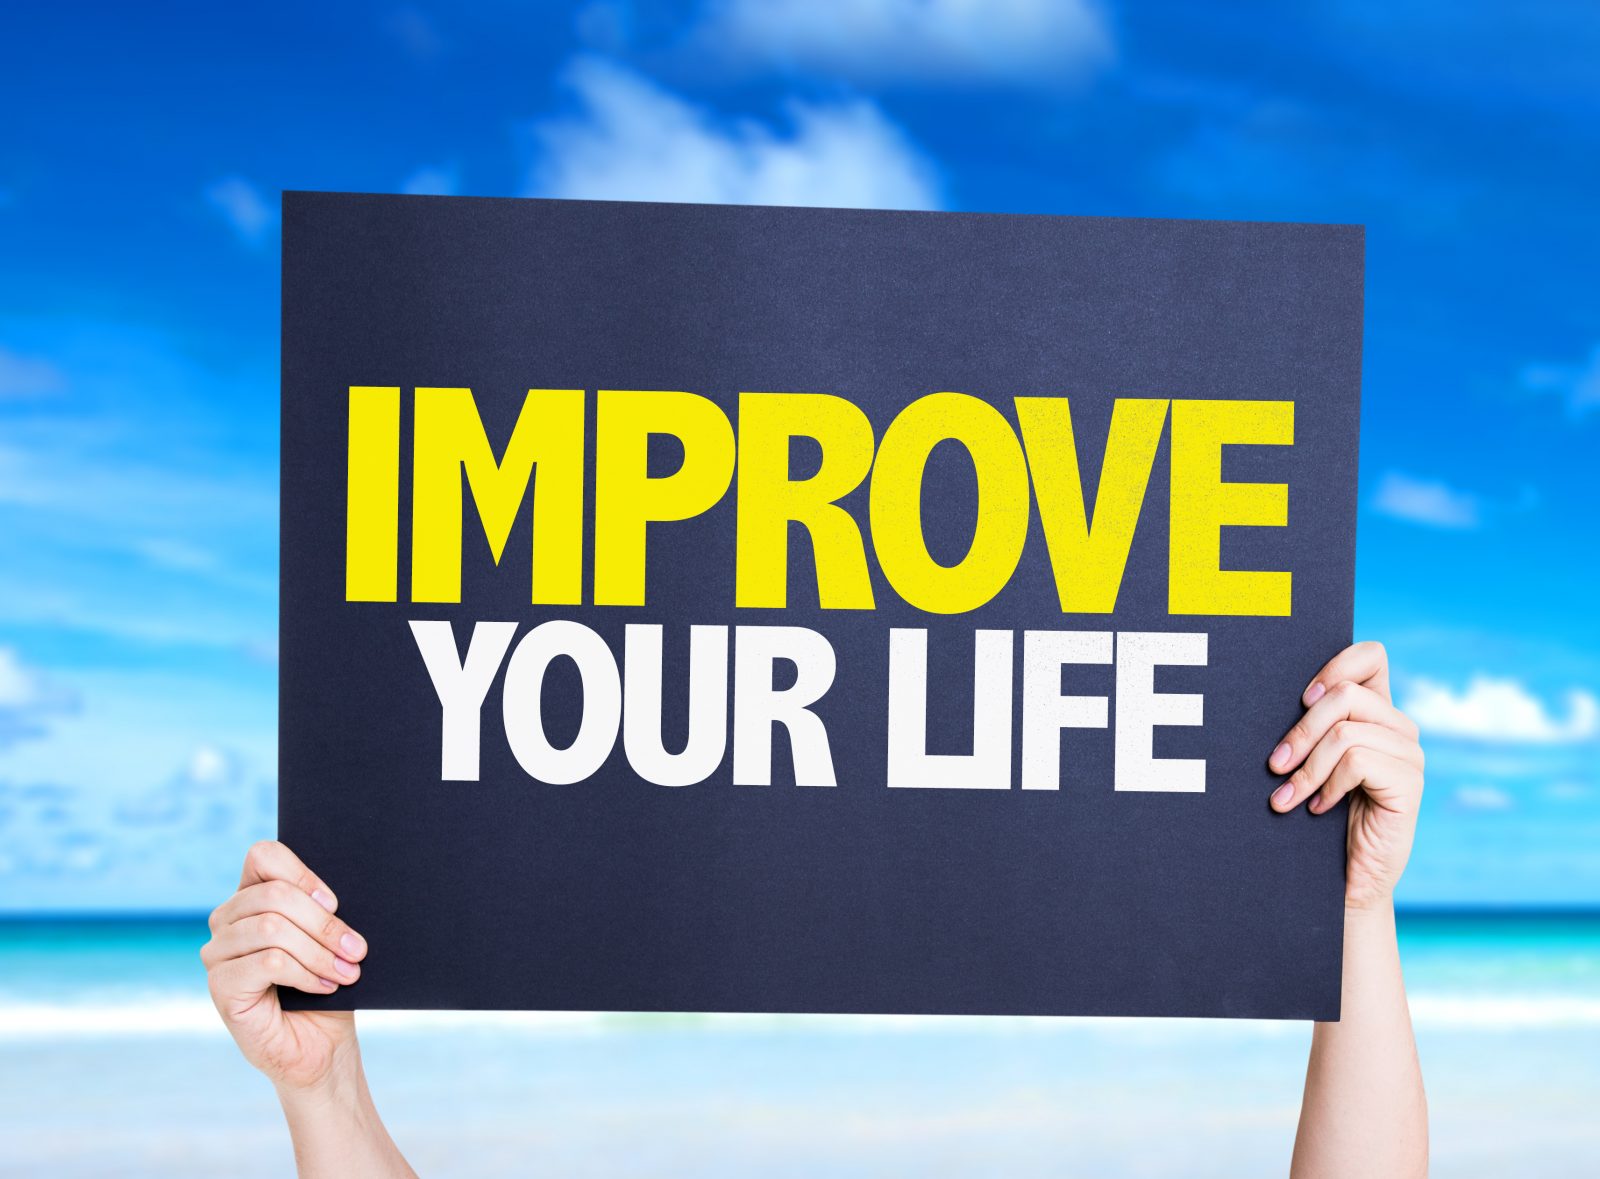 Improve your life